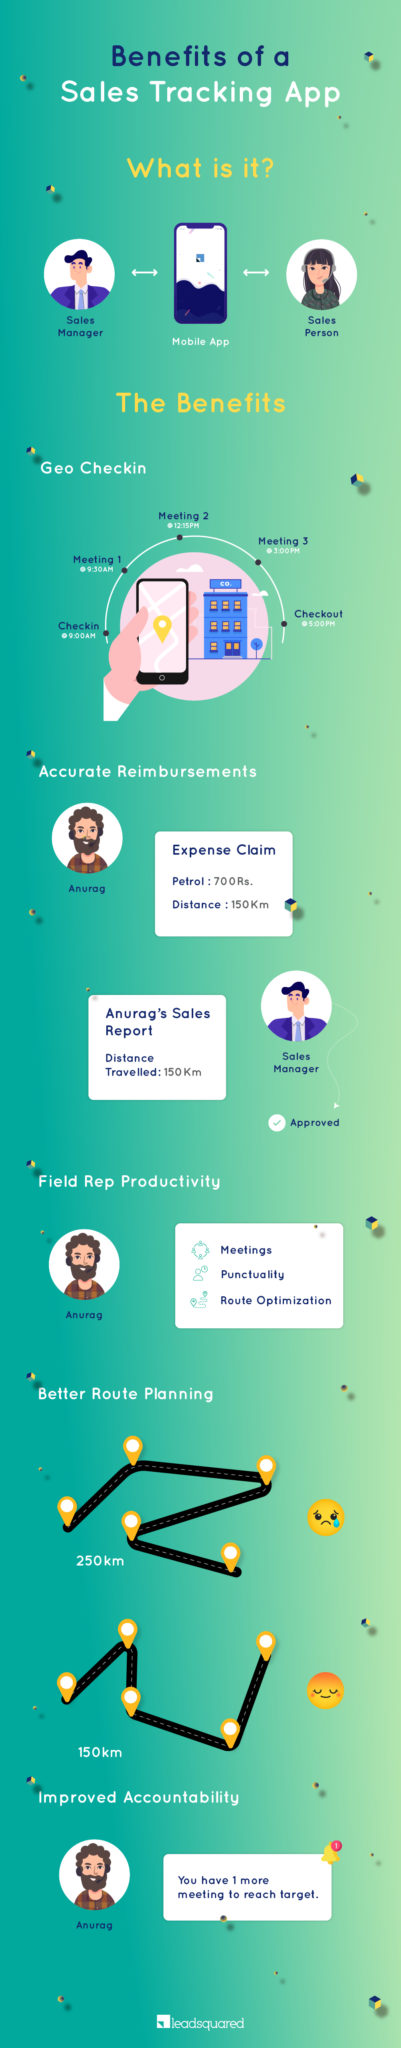 sales rep tracking - infographic